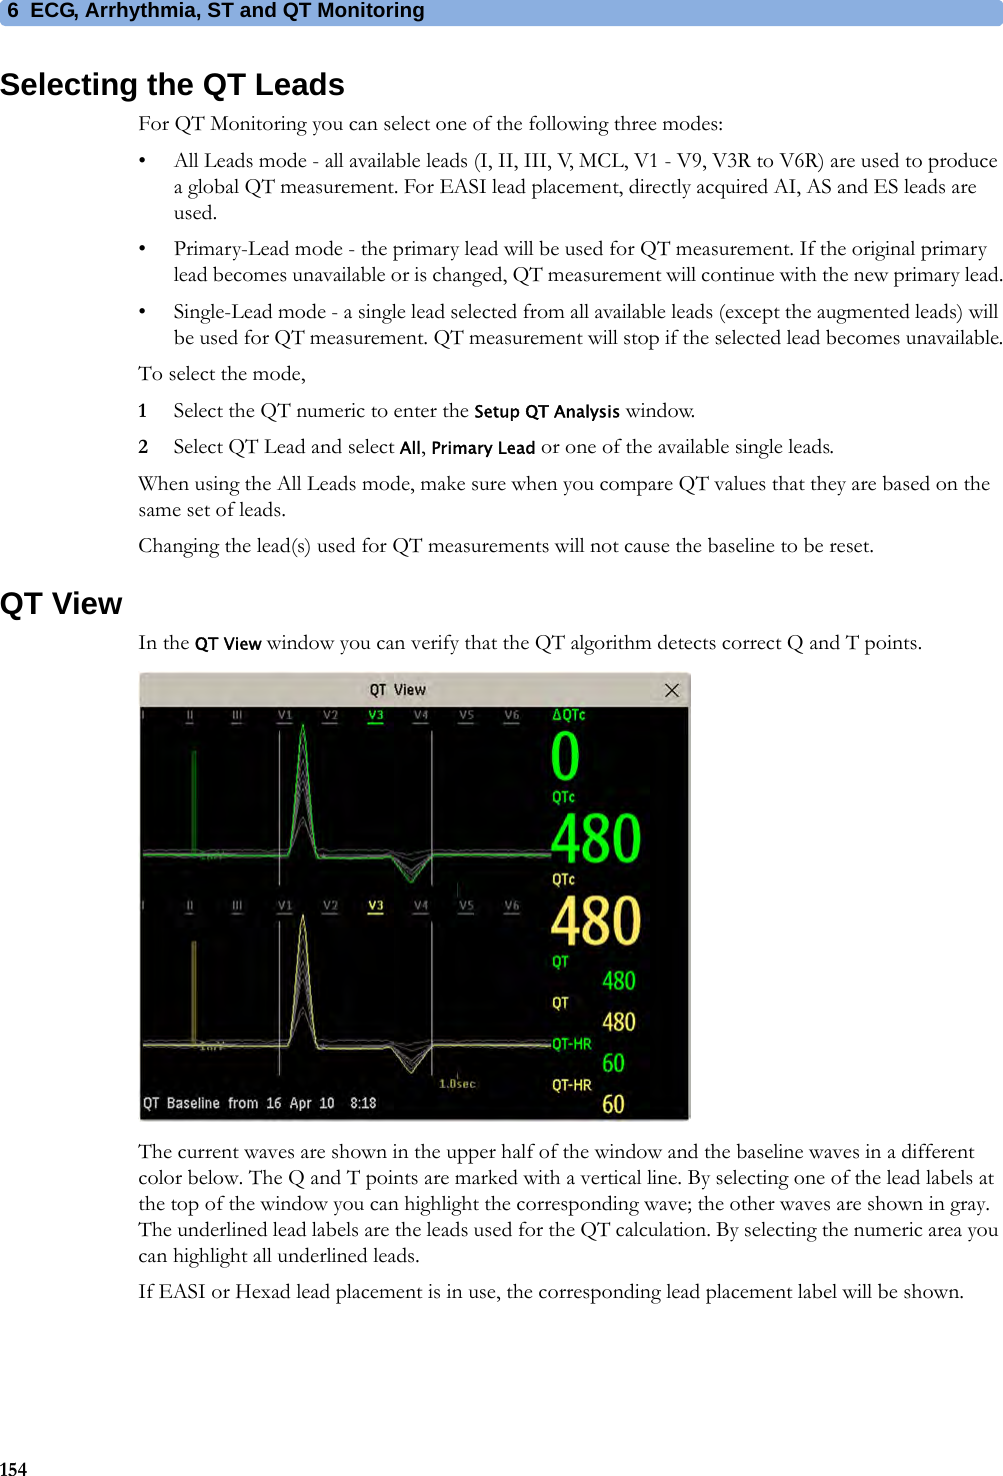 6 ECG, Arrhythmia, ST and QT Monitoring154Selecting the QT LeadsFor QT Monitoring you can select one of the following three modes:• All Leads mode - all available leads (I, II, III, V, MCL, V1 - V9, V3R to V6R) are used to produce a global QT measurement. For EASI lead placement, directly acquired AI, AS and ES leads are used.• Primary-Lead mode - the primary lead will be used for QT measurement. If the original primary lead becomes unavailable or is changed, QT measurement will continue with the new primary lead.• Single-Lead mode - a single lead selected from all available leads (except the augmented leads) will be used for QT measurement. QT measurement will stop if the selected lead becomes unavailable.To select the mode,1Select the QT numeric to enter the Setup QT Analysis window.2Select QT Lead and select All, Primary Lead or one of the available single leads.When using the All Leads mode, make sure when you compare QT values that they are based on the same set of leads.Changing the lead(s) used for QT measurements will not cause the baseline to be reset.QT ViewIn the QT View window you can verify that the QT algorithm detects correct Q and T points.The current waves are shown in the upper half of the window and the baseline waves in a different color below. The Q and T points are marked with a vertical line. By selecting one of the lead labels at the top of the window you can highlight the corresponding wave; the other waves are shown in gray. The underlined lead labels are the leads used for the QT calculation. By selecting the numeric area you can highlight all underlined leads.If EASI or Hexad lead placement is in use, the corresponding lead placement label will be shown.